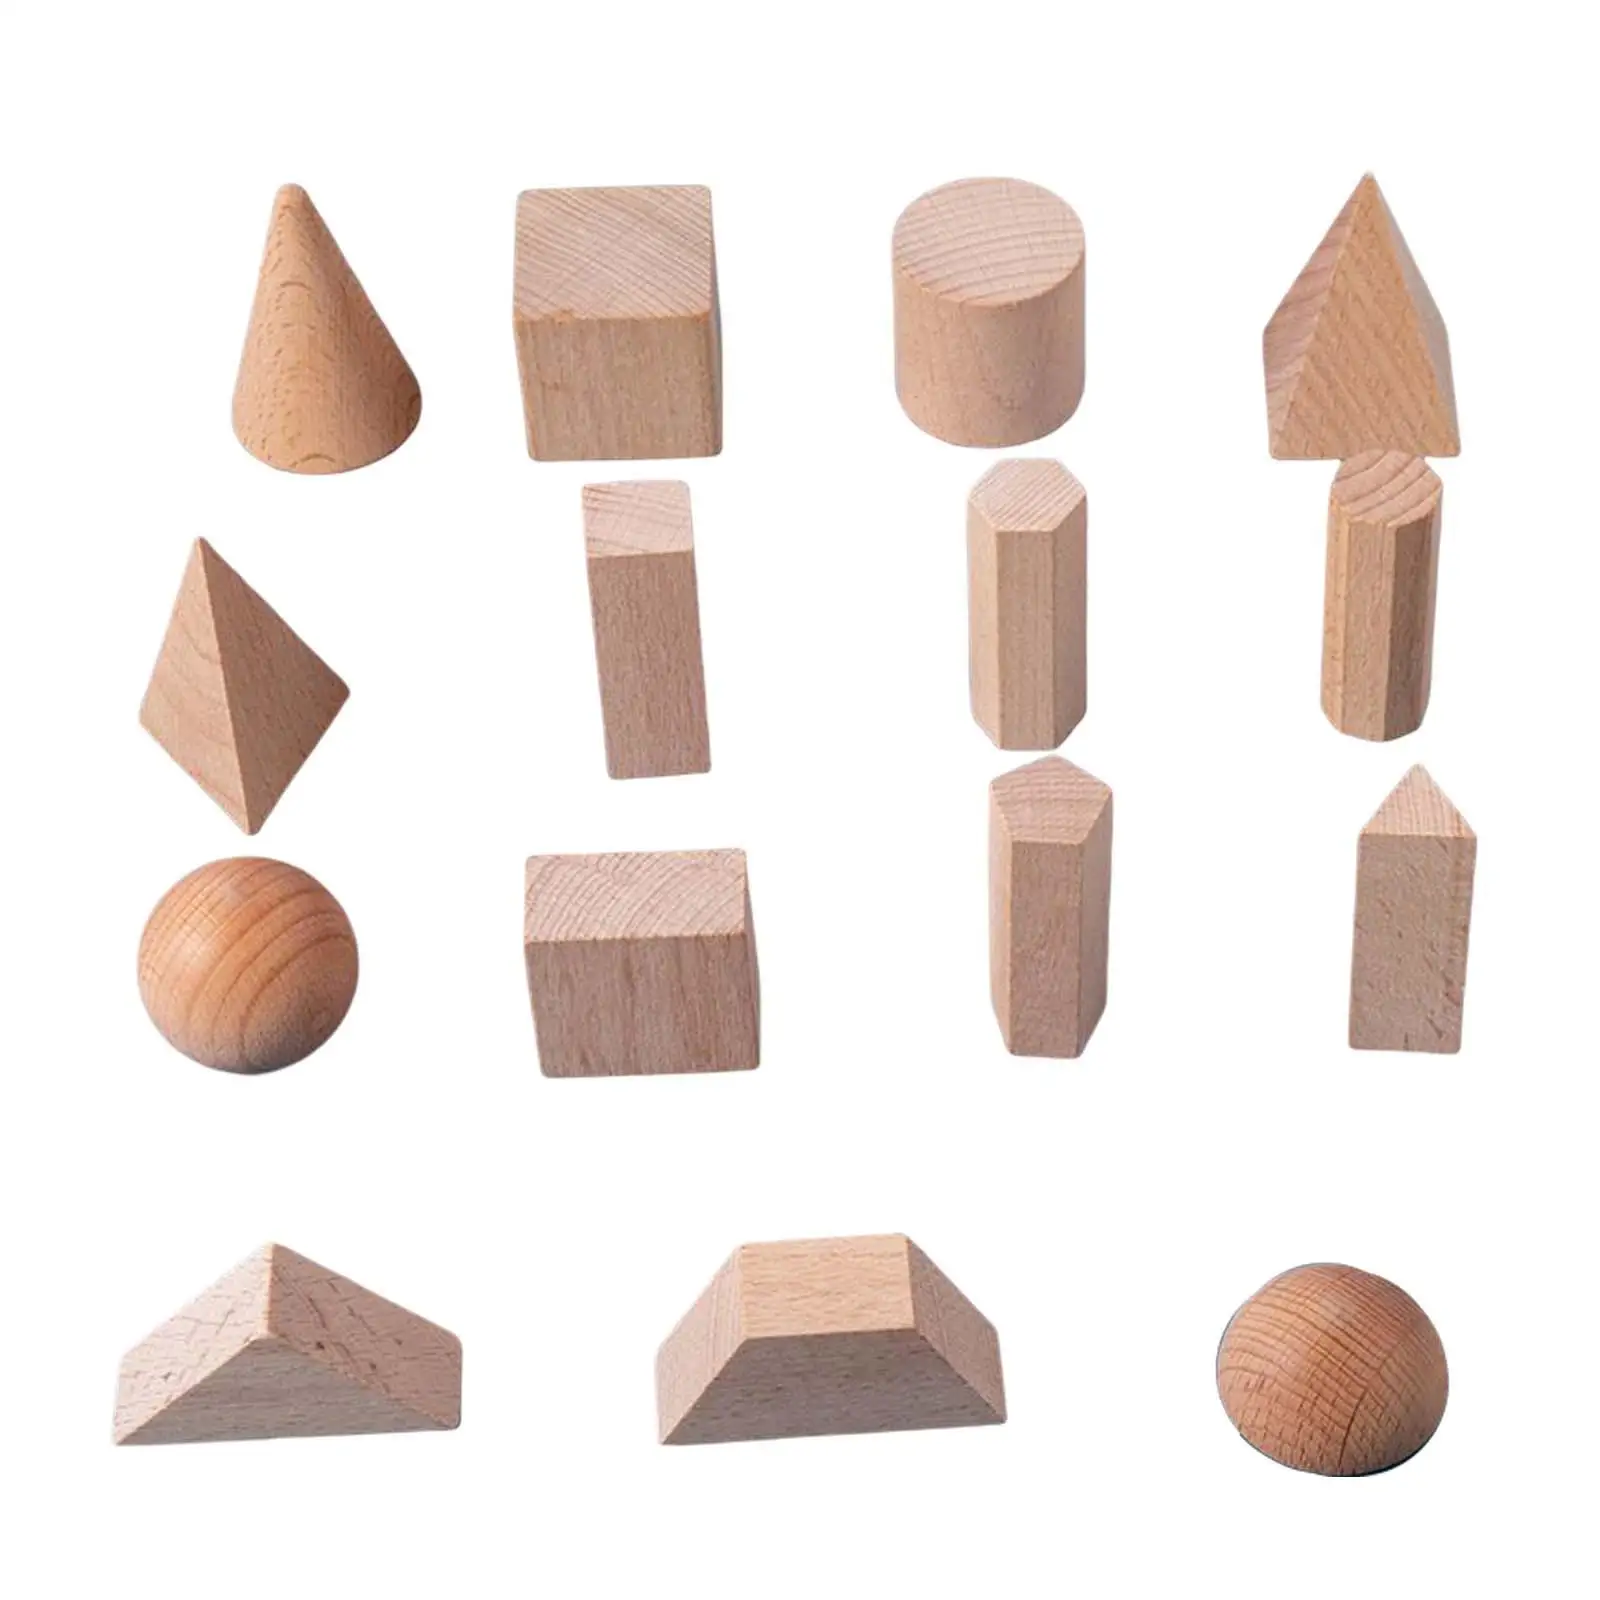 15 Pieces Wooden Geometric Solid Blocks 3D Shapes Learning Education Math Toys for Ages 2+ Kids